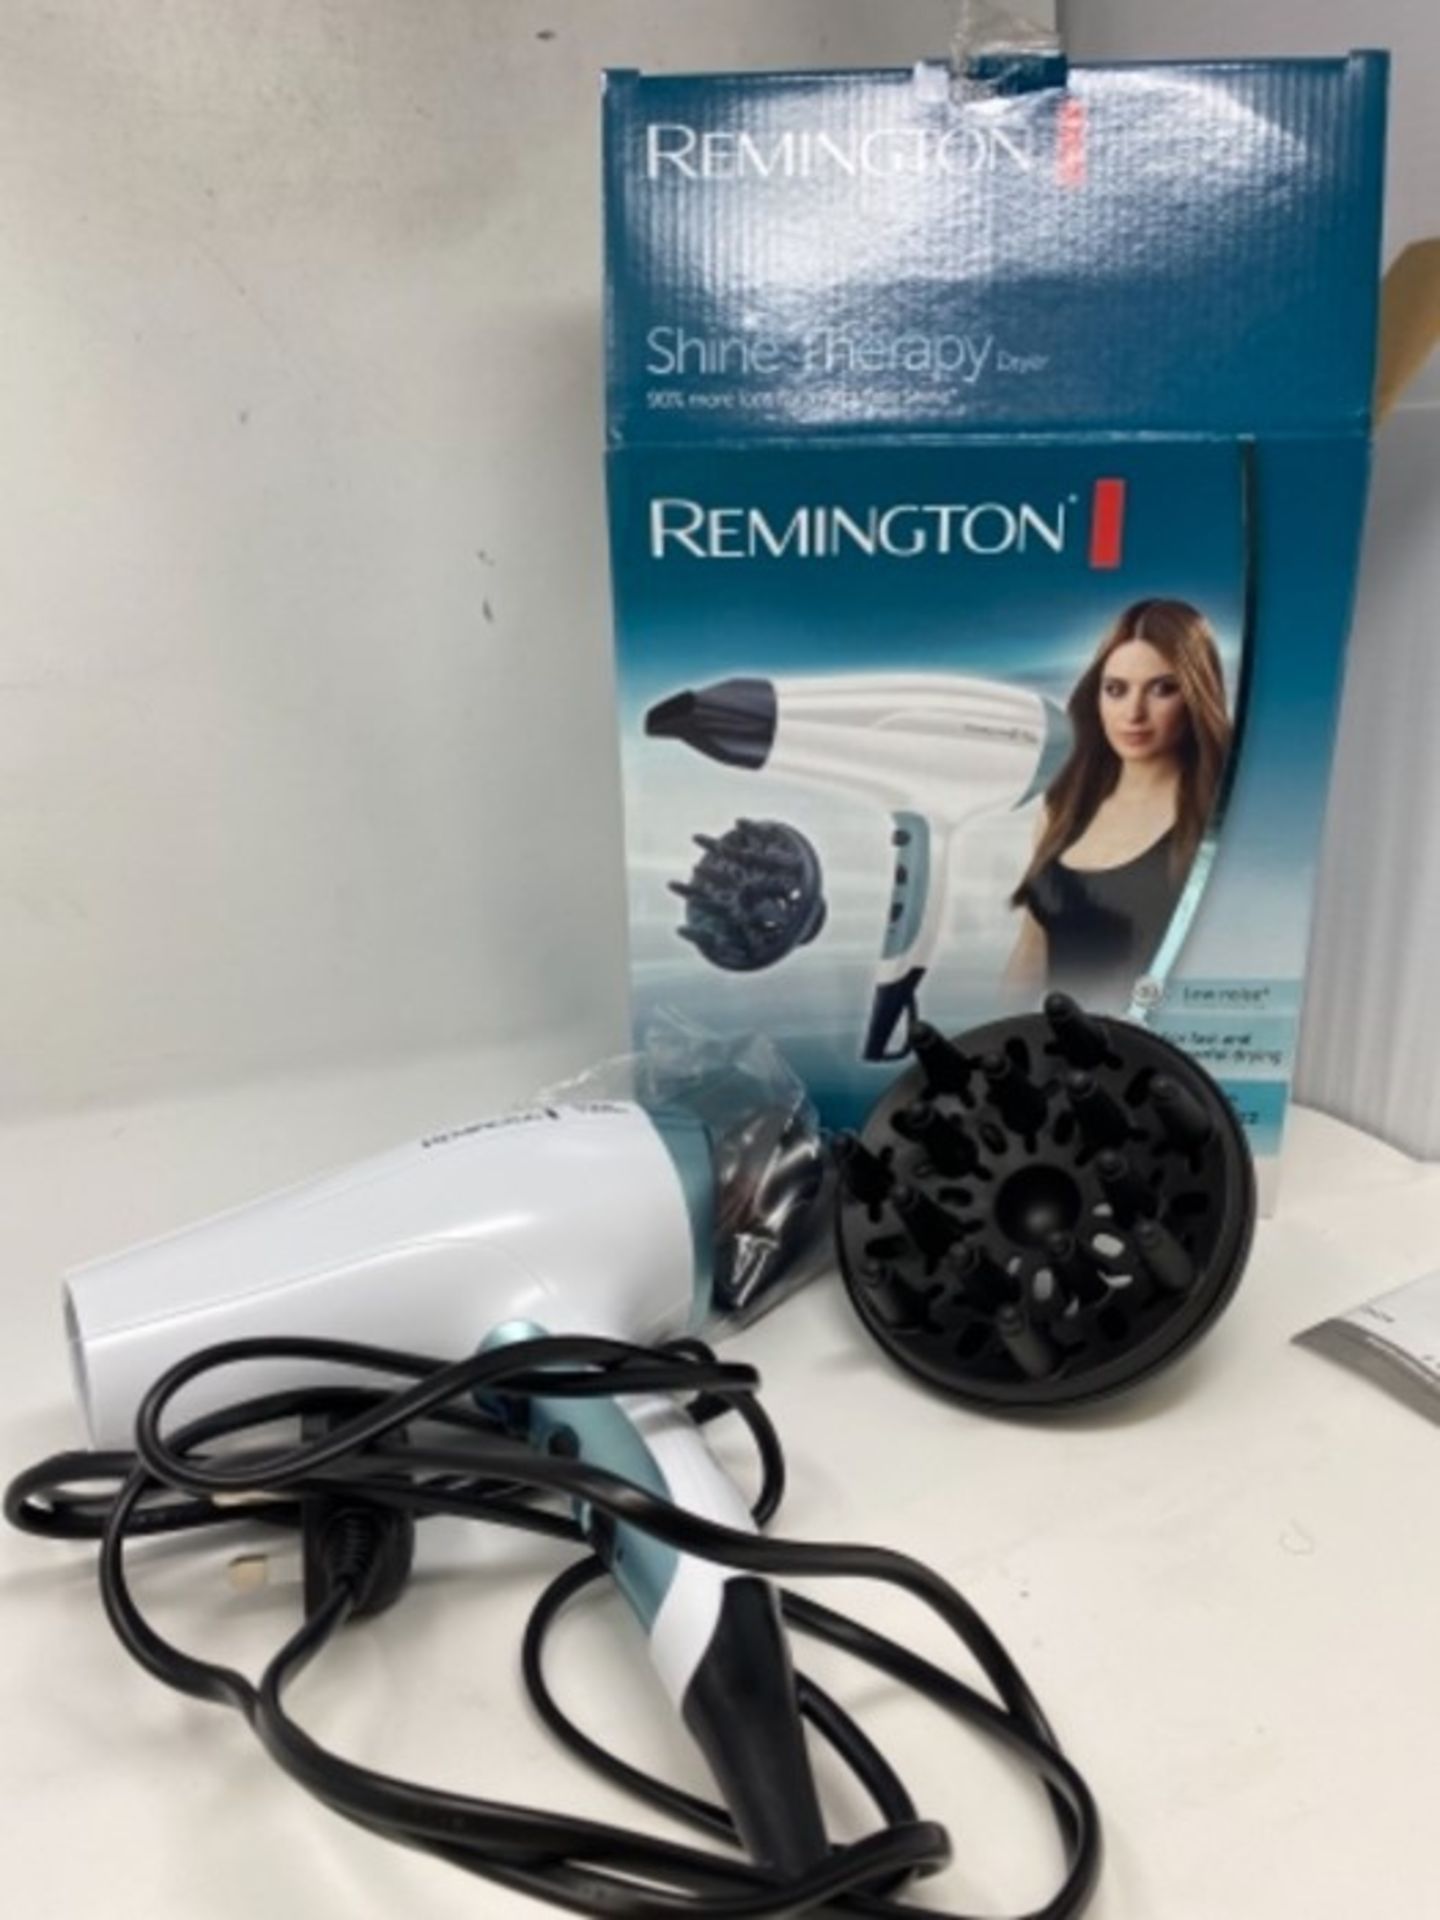 Remington Shine Therapy Hair Dryer with Power Dry and Cool Shot for a Frizz Free Shine - Image 2 of 2